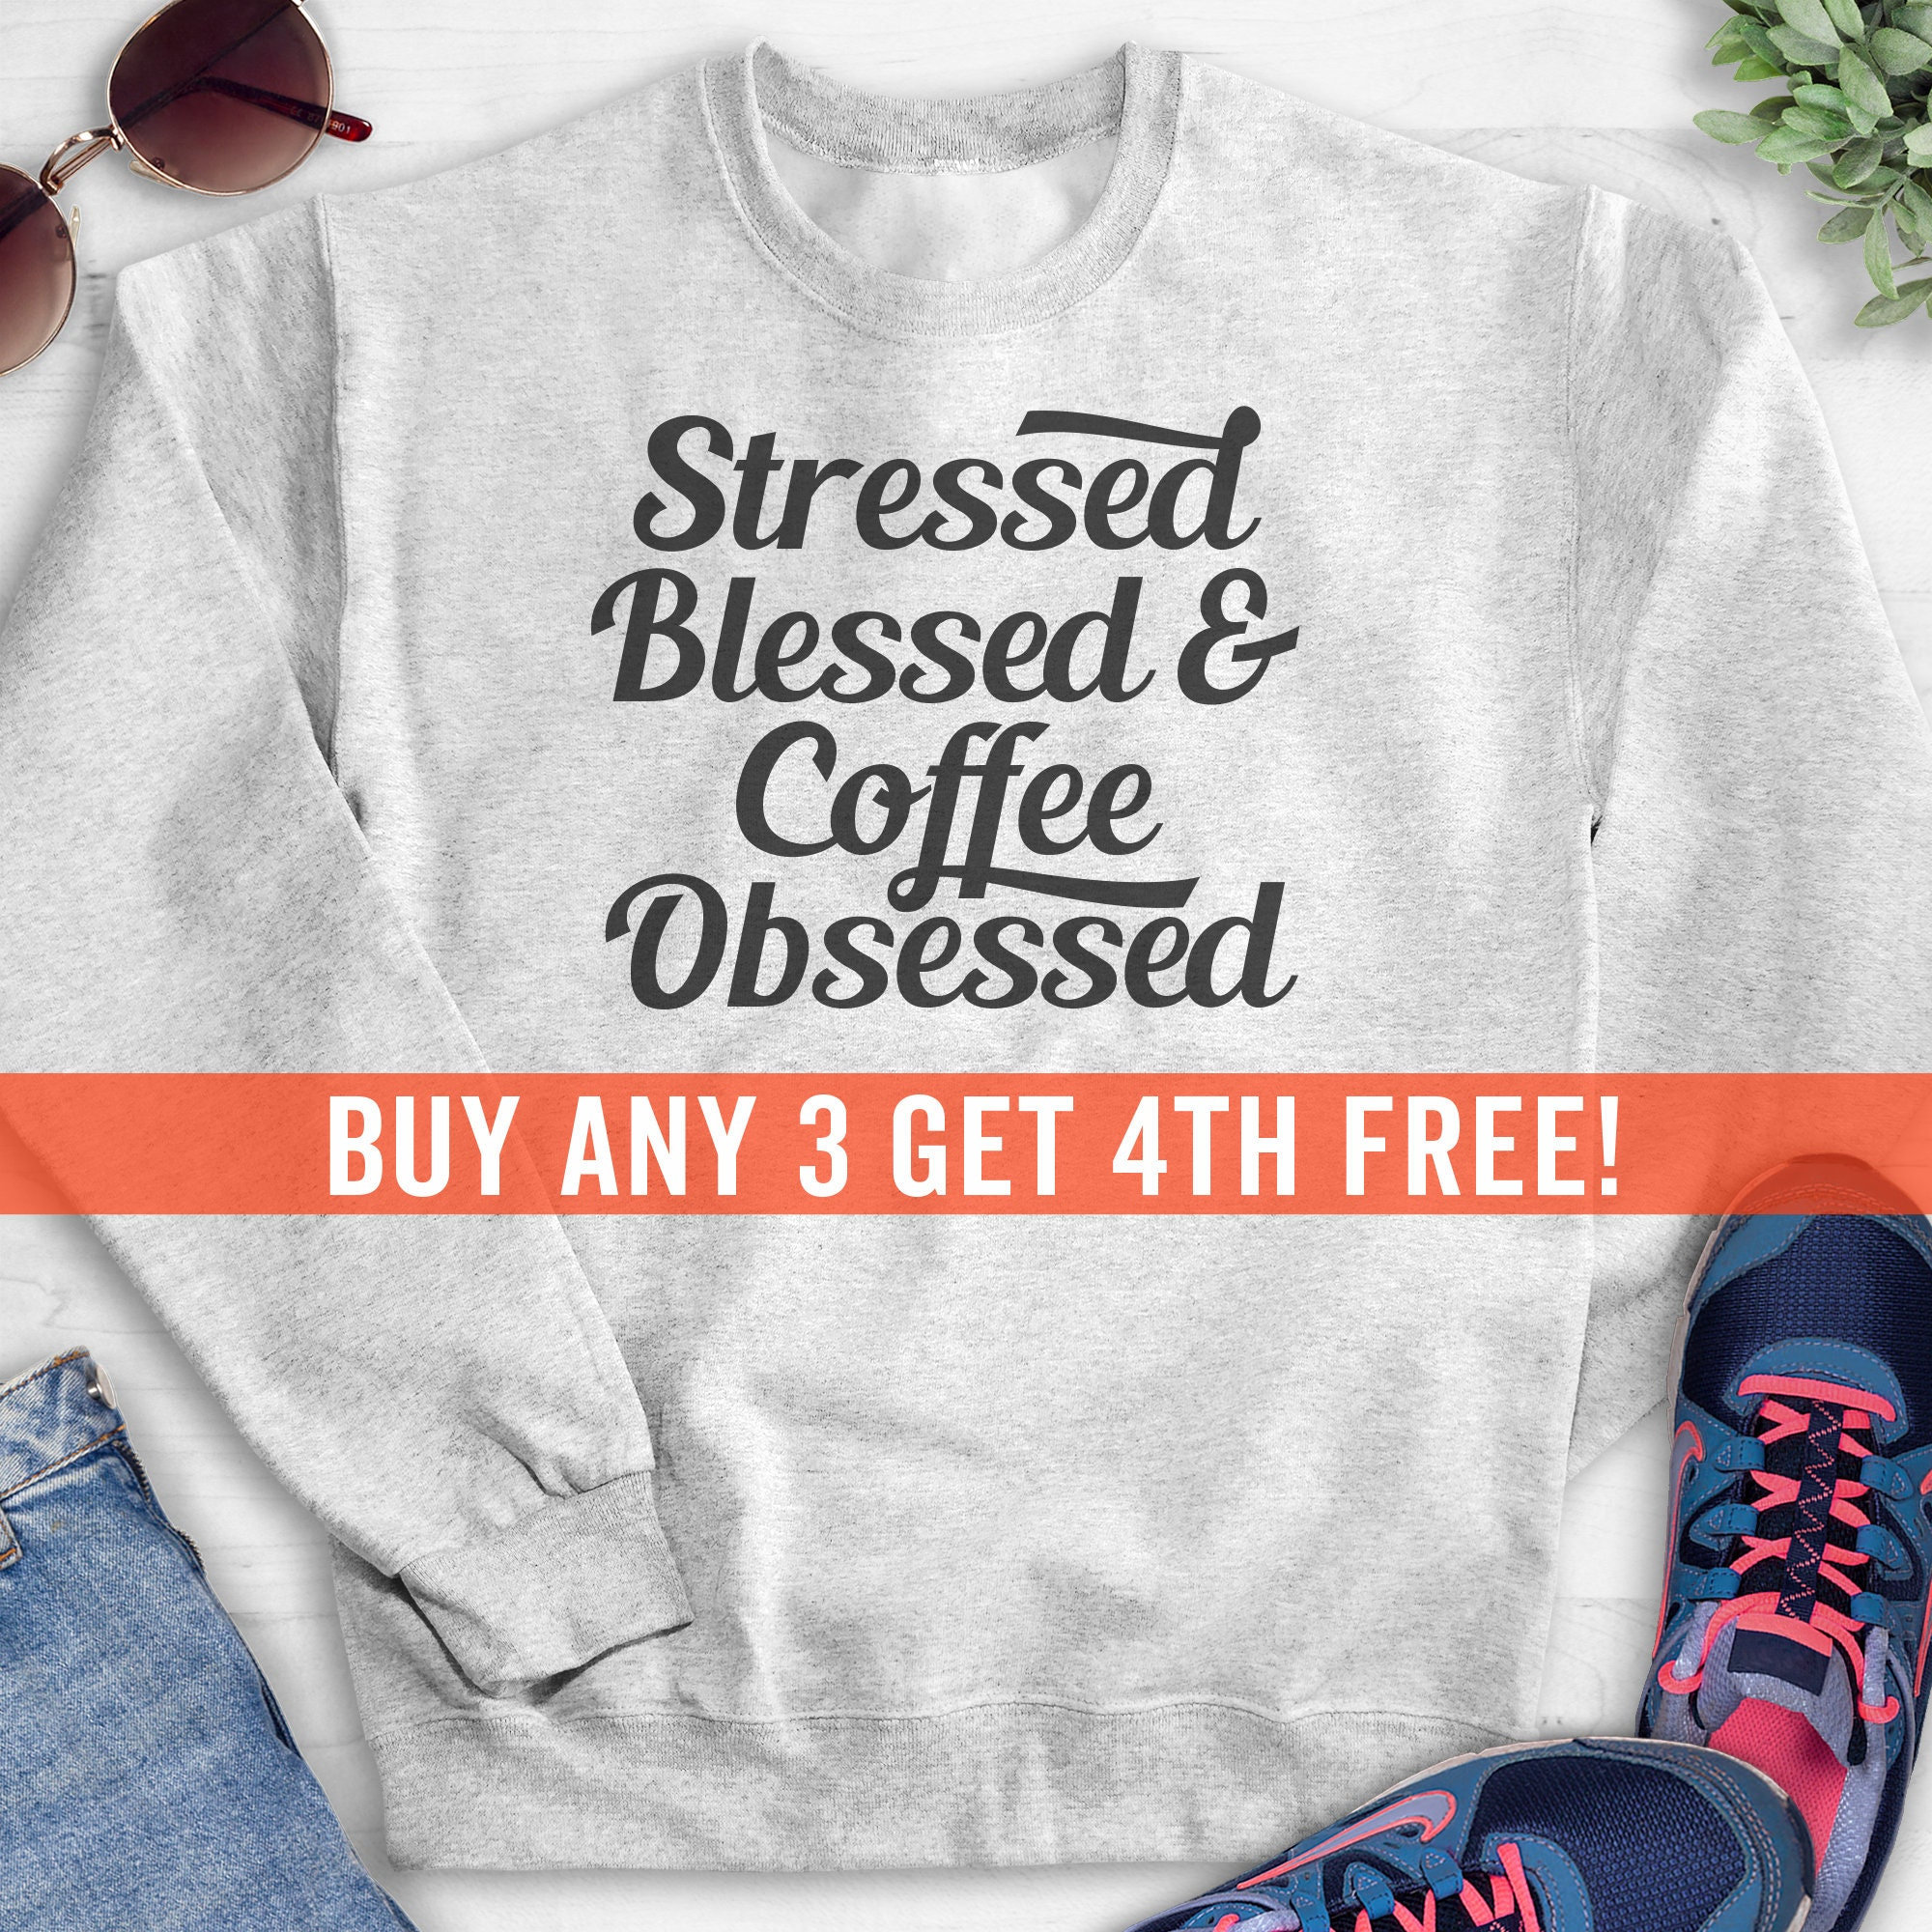 NOFO_01998 and Coffee Obsessed Hooded Sweatshirt Stressed Blessed